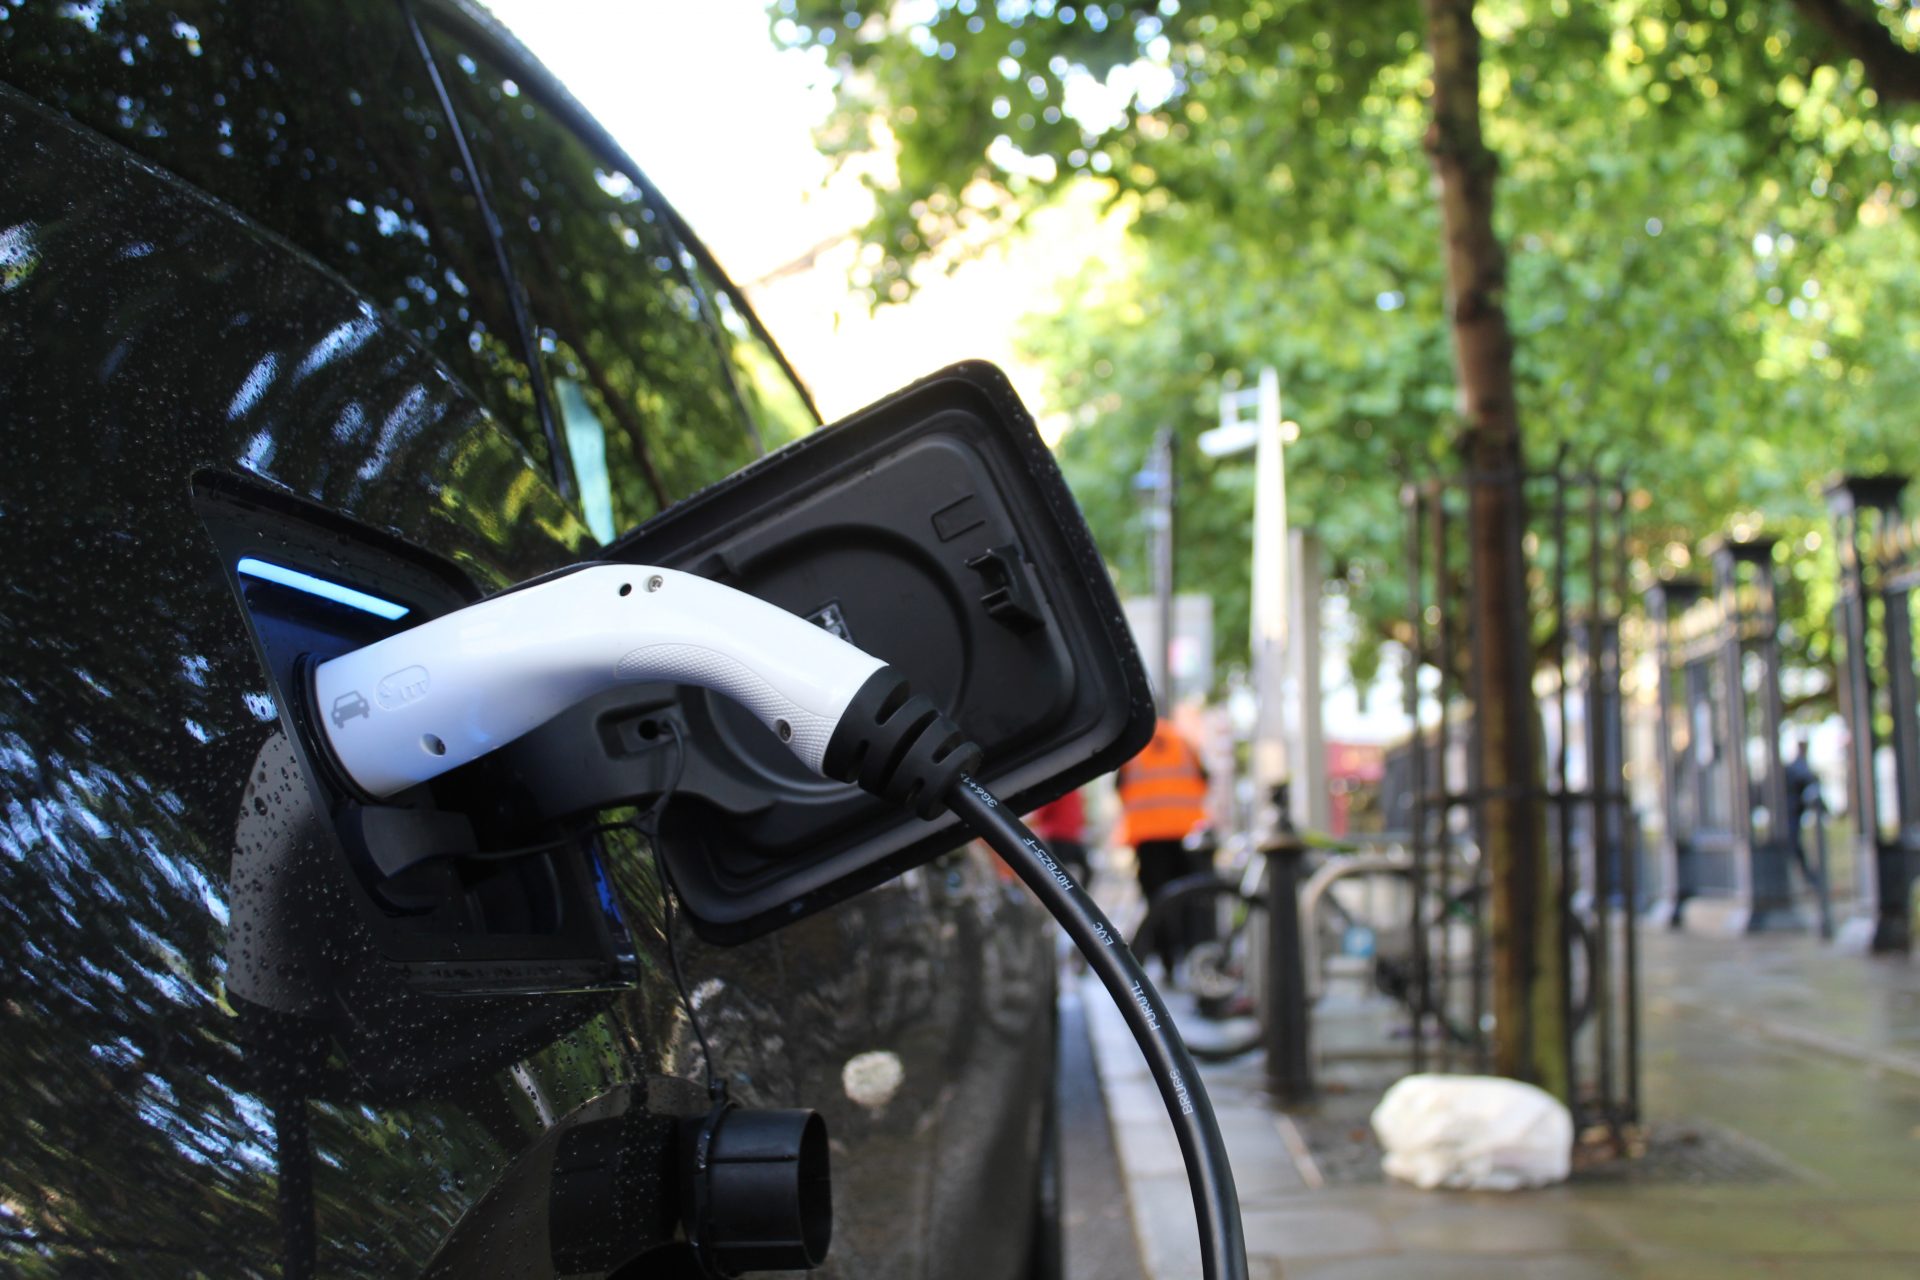 A charging cable is plugged into an electric car parked at the side of the road. Green trees in the background.